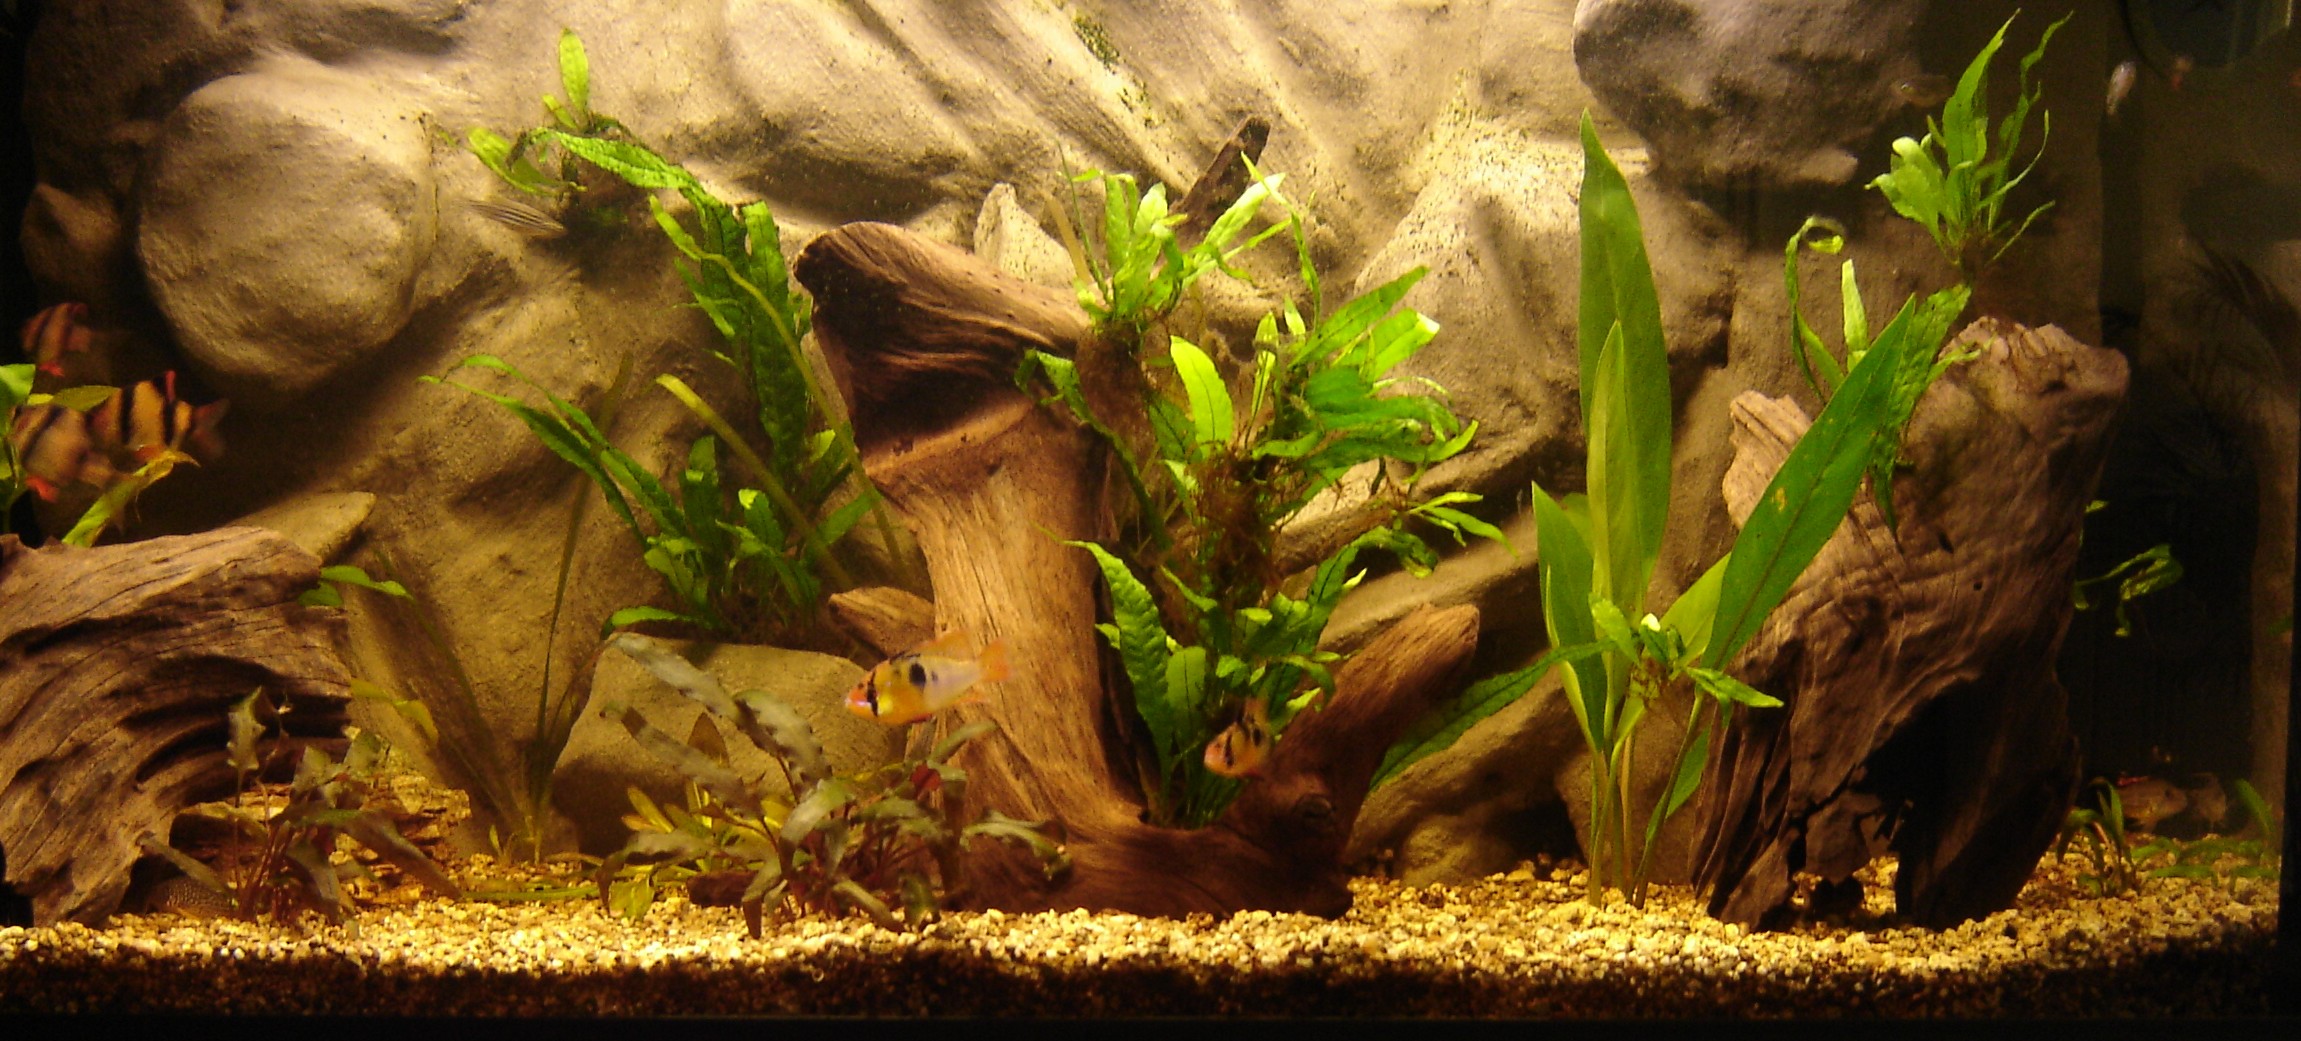 Cool Fish Tank Backgrounds